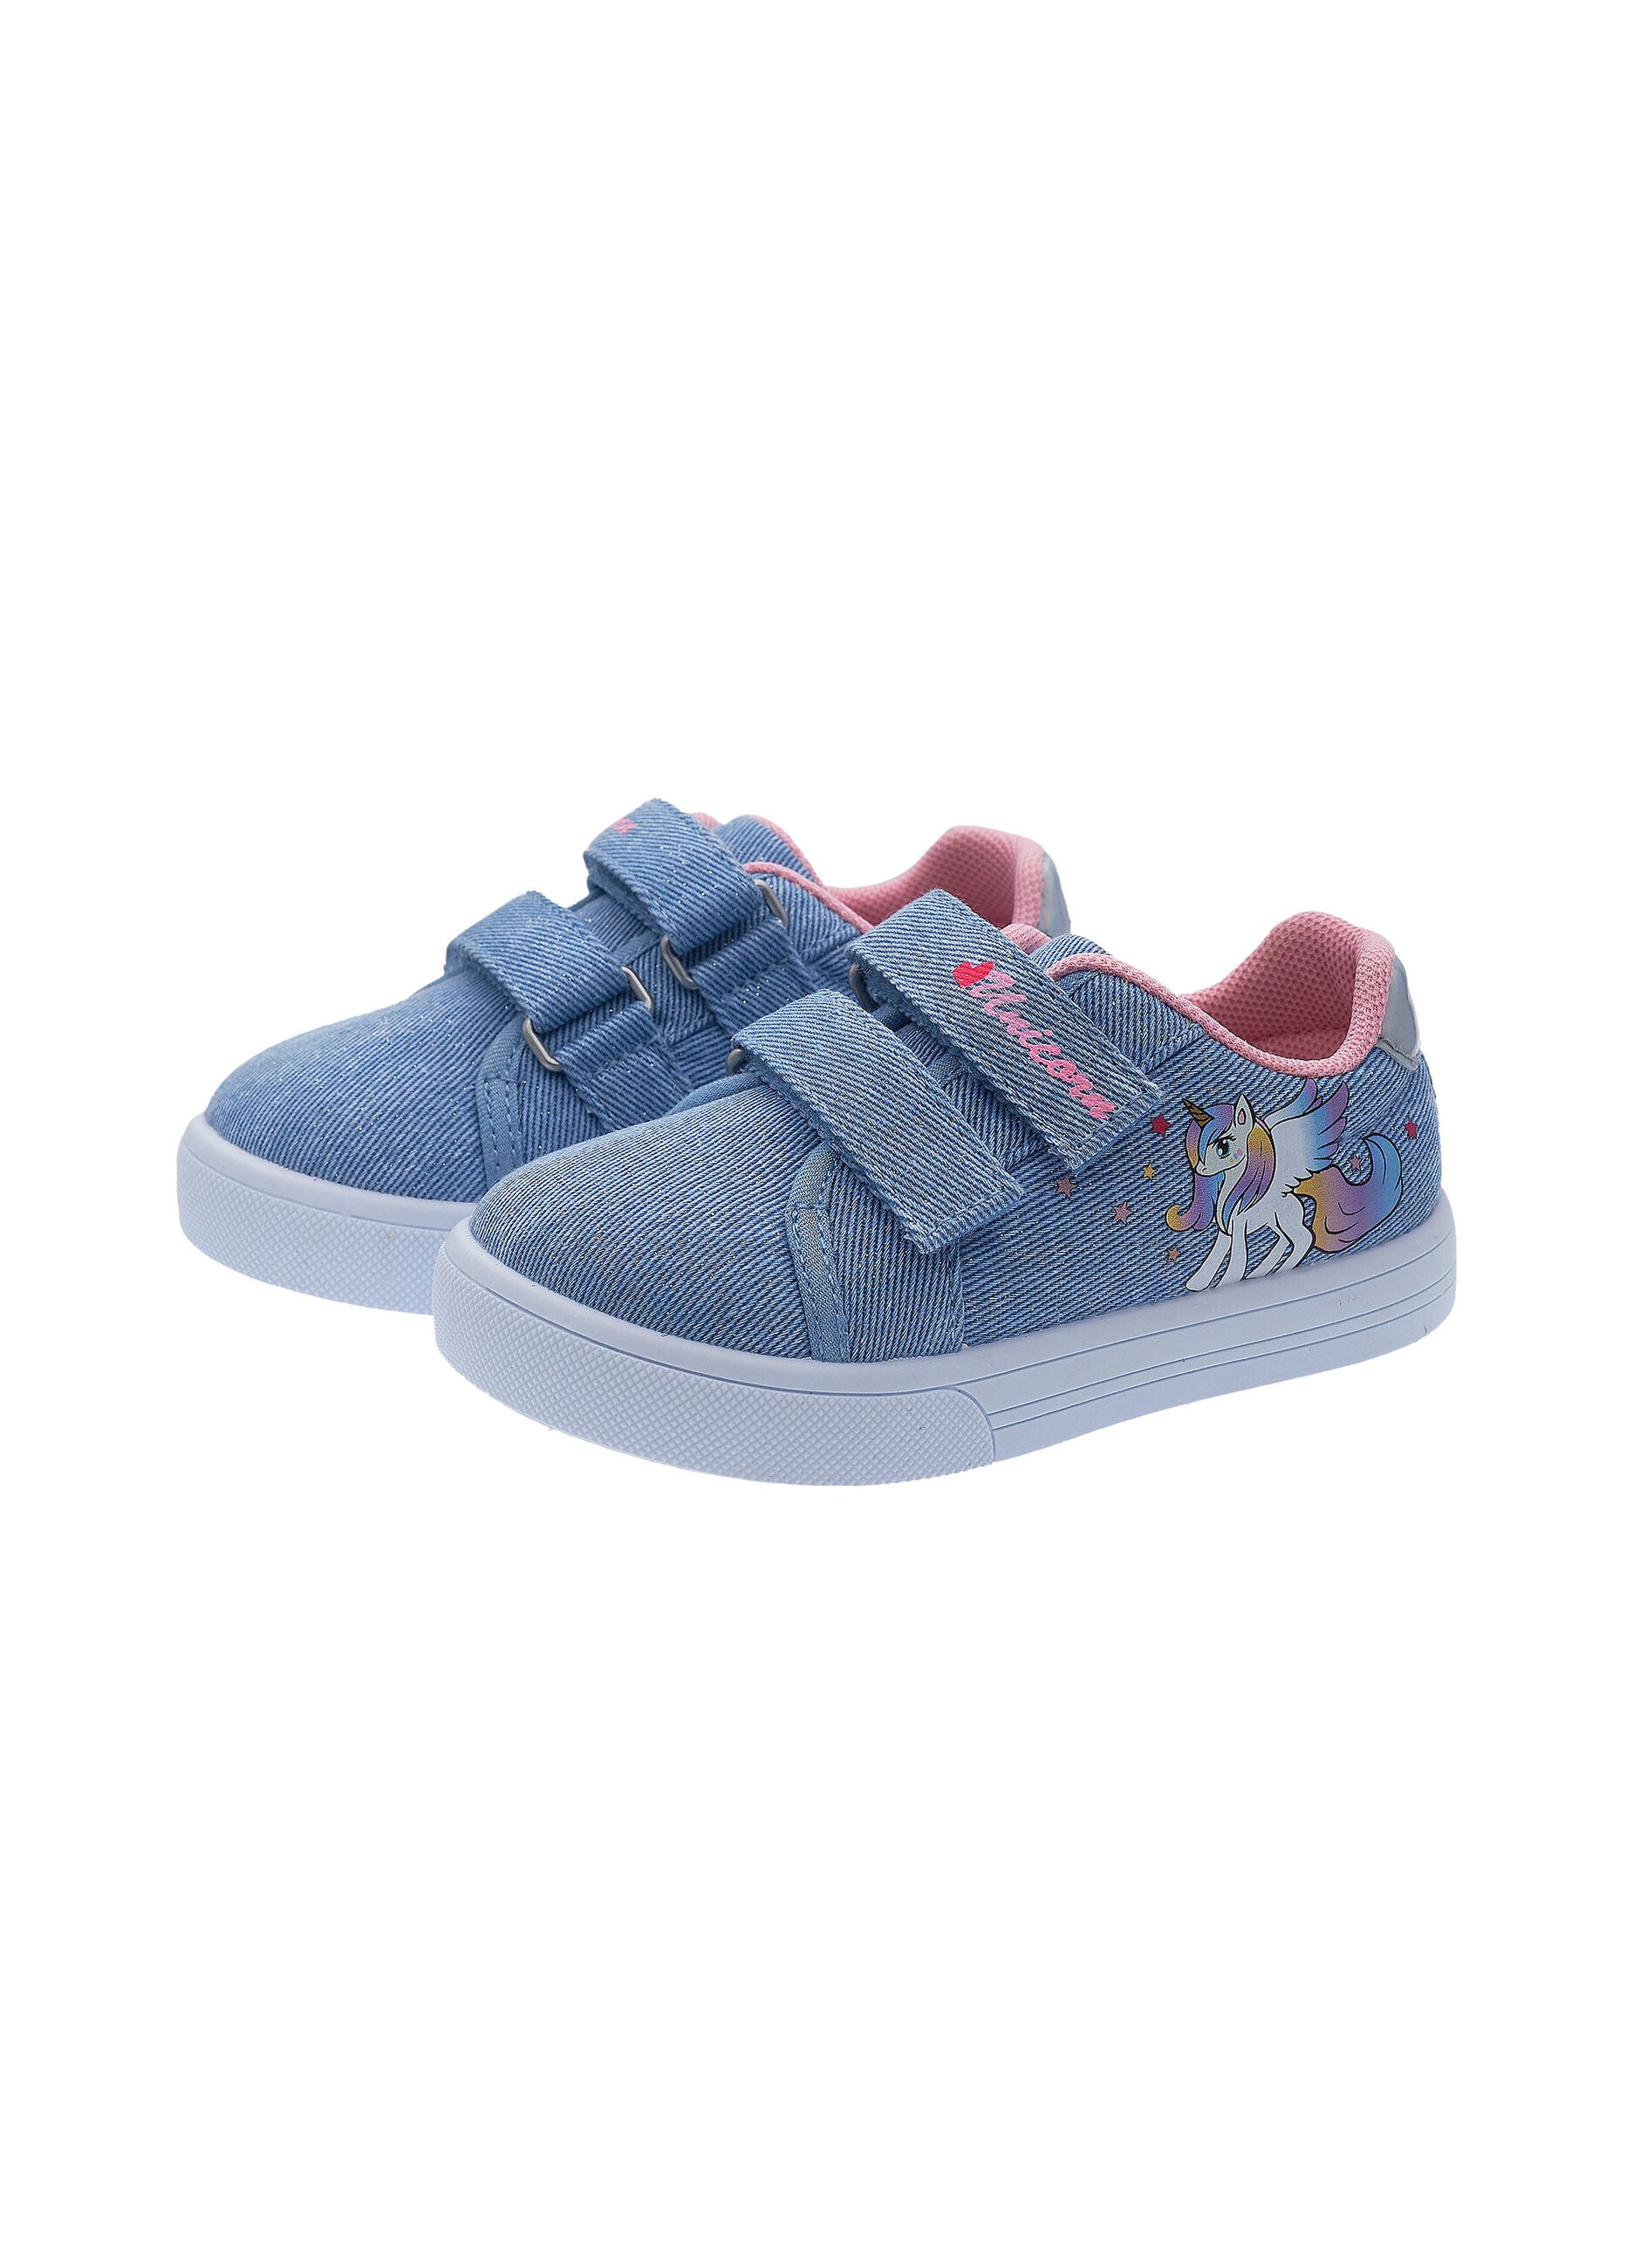 Frona sneakers with double Velcro strap